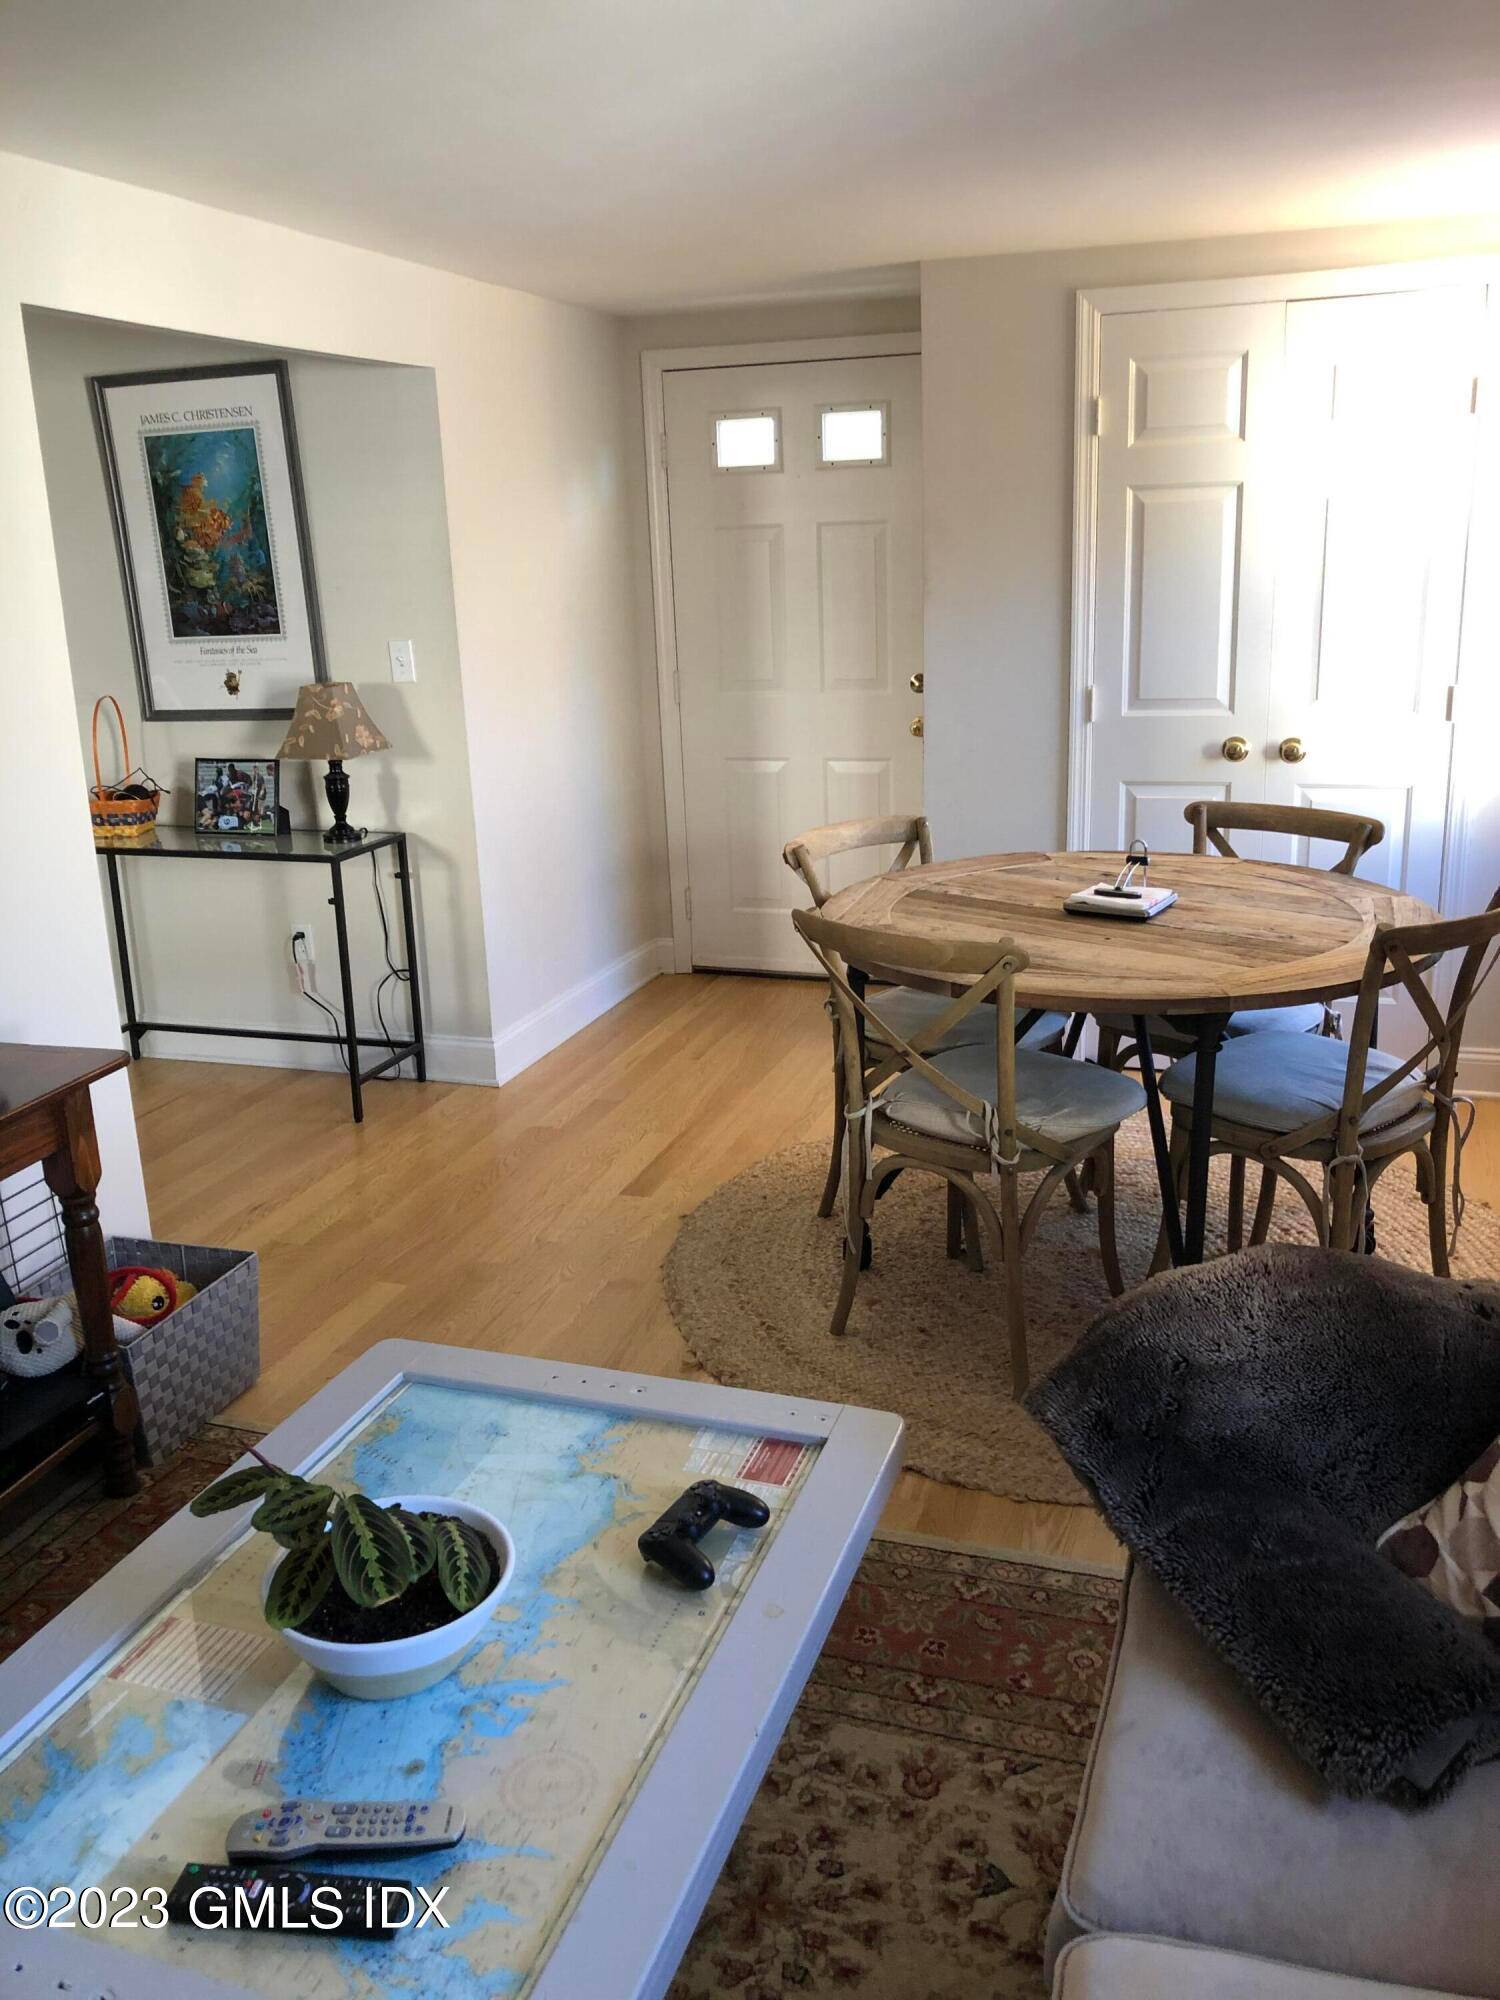 Like New Central Greenwich 2 Bedroom Apartment, Hardwood Floors, Stainless Granite Kitchen, Central HVAC, Laundry in Unit, Storage and Parking.